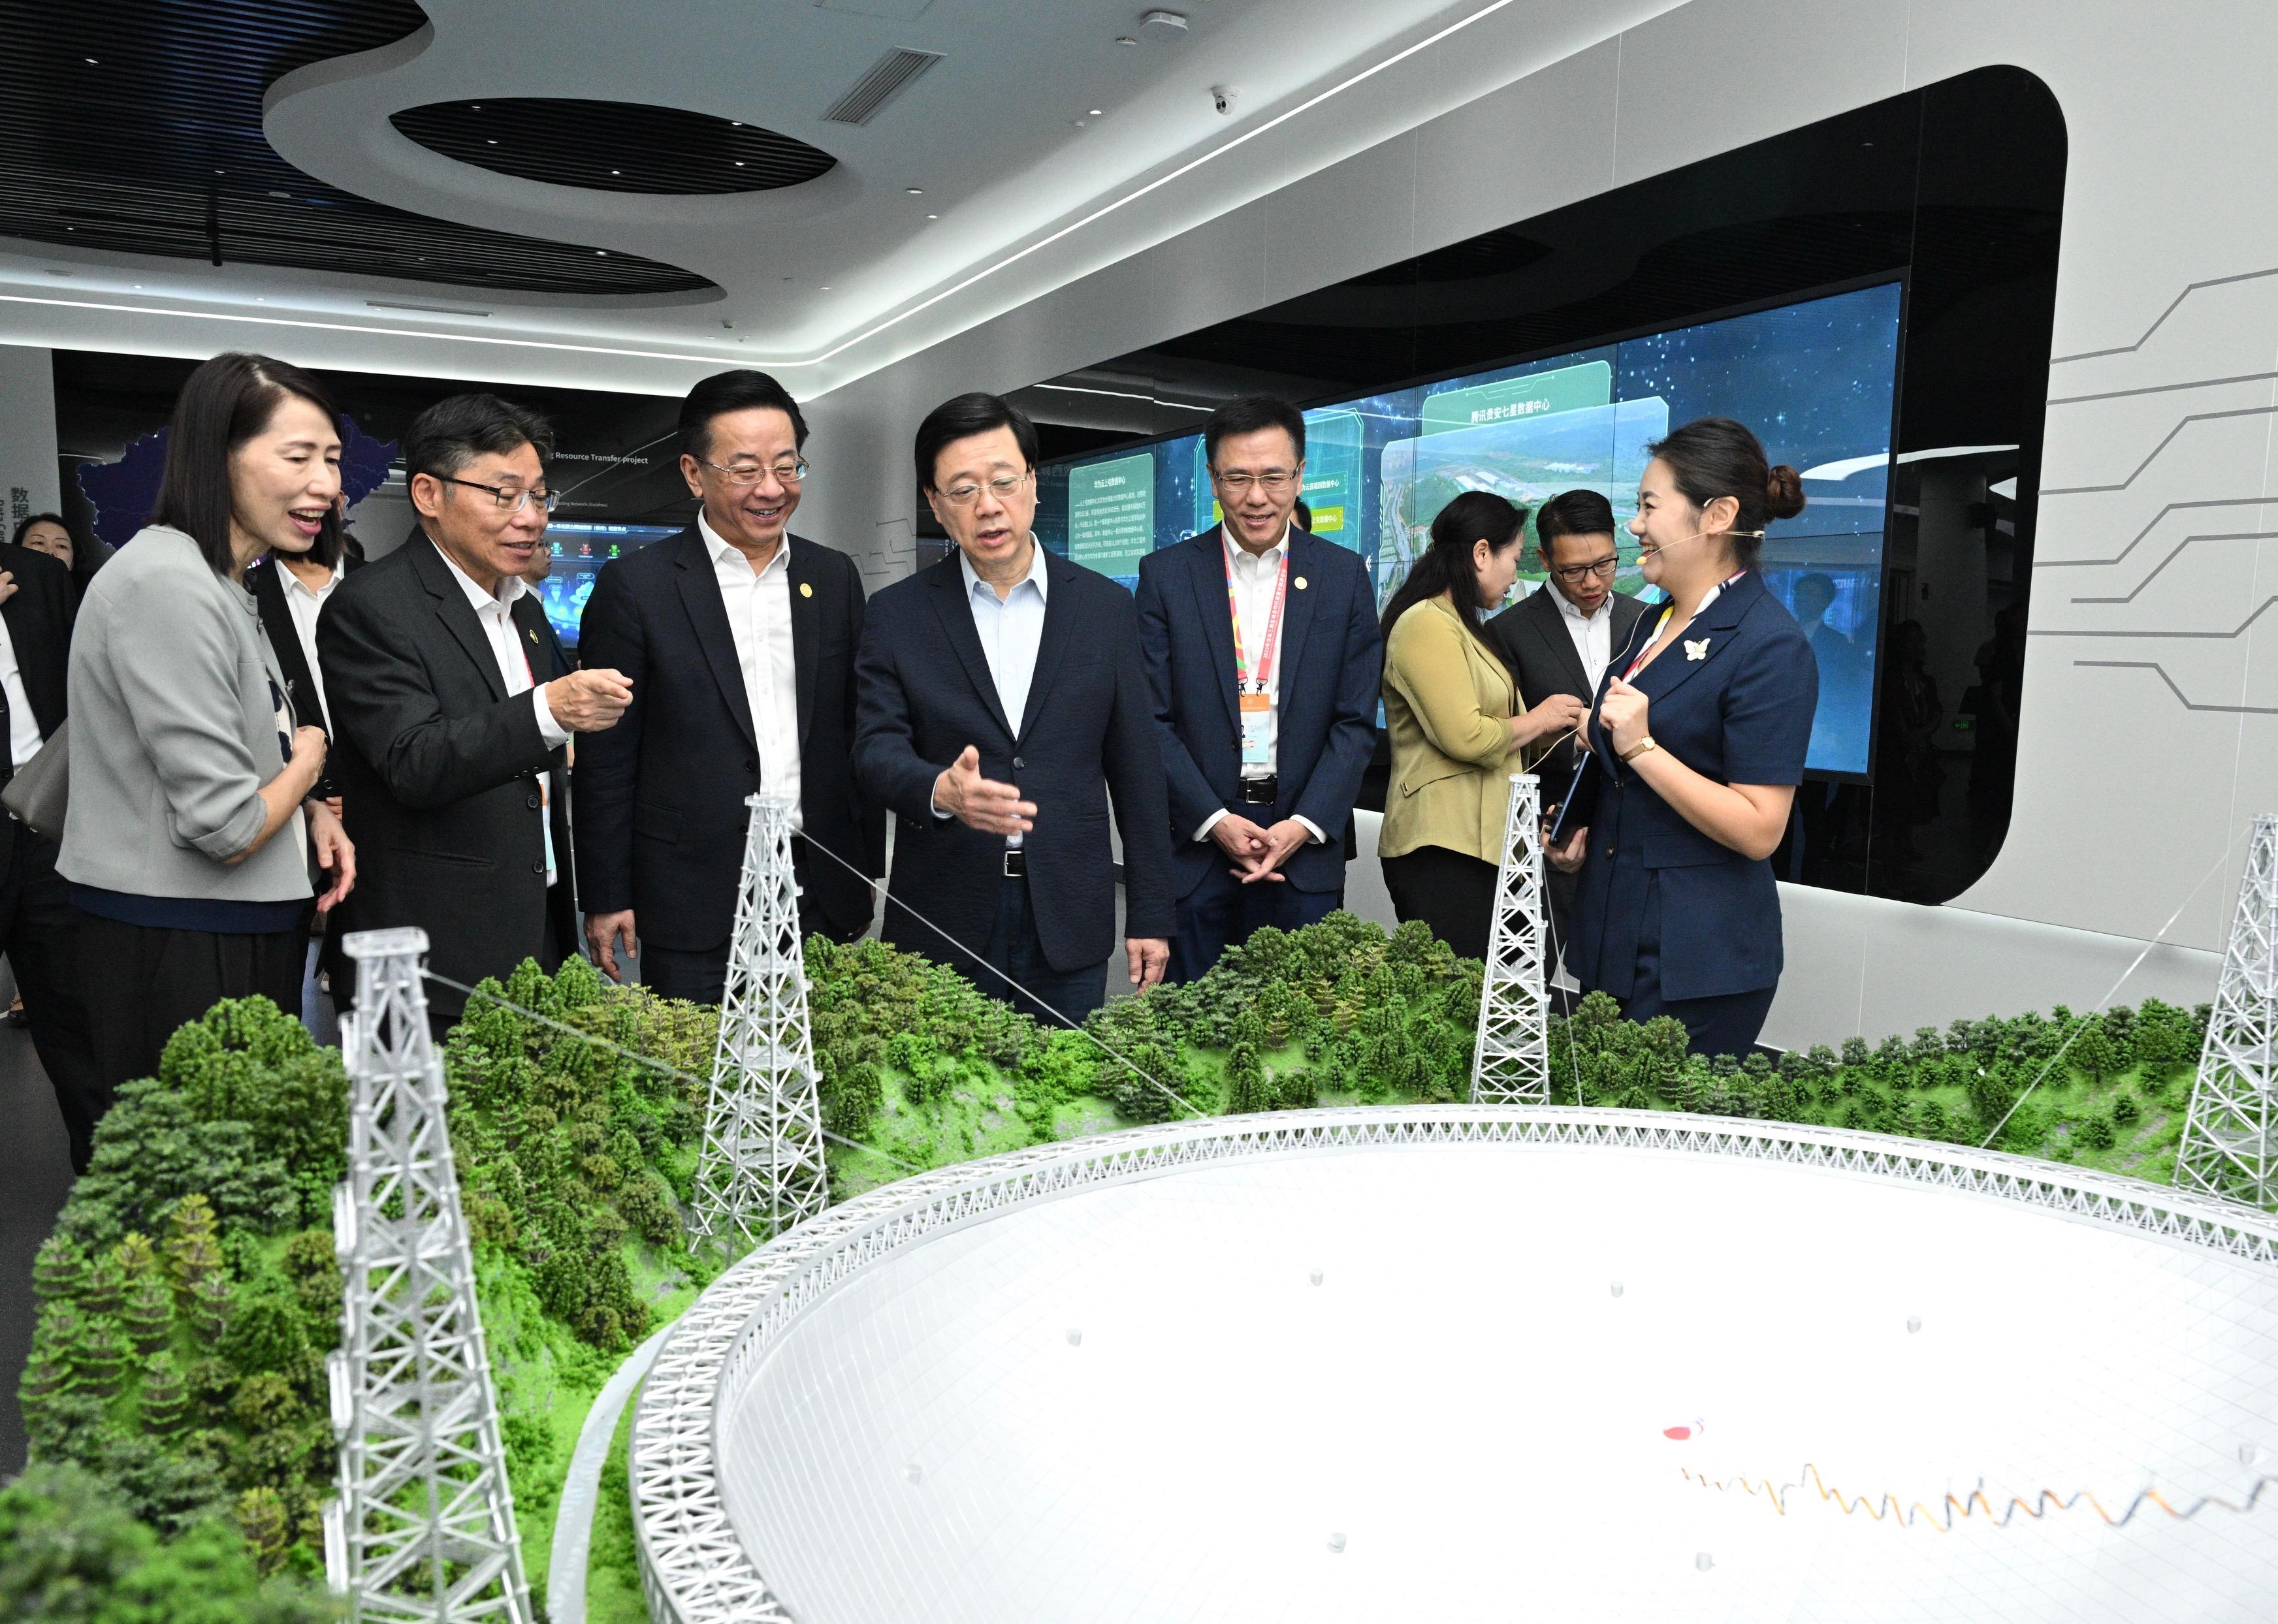 The Chief Executive, Mr John Lee, led a delegation to start his visit programme in Guiyang, today (July 6). Photo shows (from left) the Director of the Chief Executive's Office, Ms Carol Yip; the Secretary for Transport and Logistics, Mr Lam Sai-hung; member of the Standing Committee and Head of the Publicity Department of the Guizhou CPC Provincial Committee, Mr Lu Yongzheng; Mr Lee; and the Secretary for Innovation, Technology and Industry, Professor Sun Dong,  listening to the introduction of the development of the data centre during the visit to the National Big Data (Guizhou) Comprehensive Pilot Zone Communication and Experience Center.